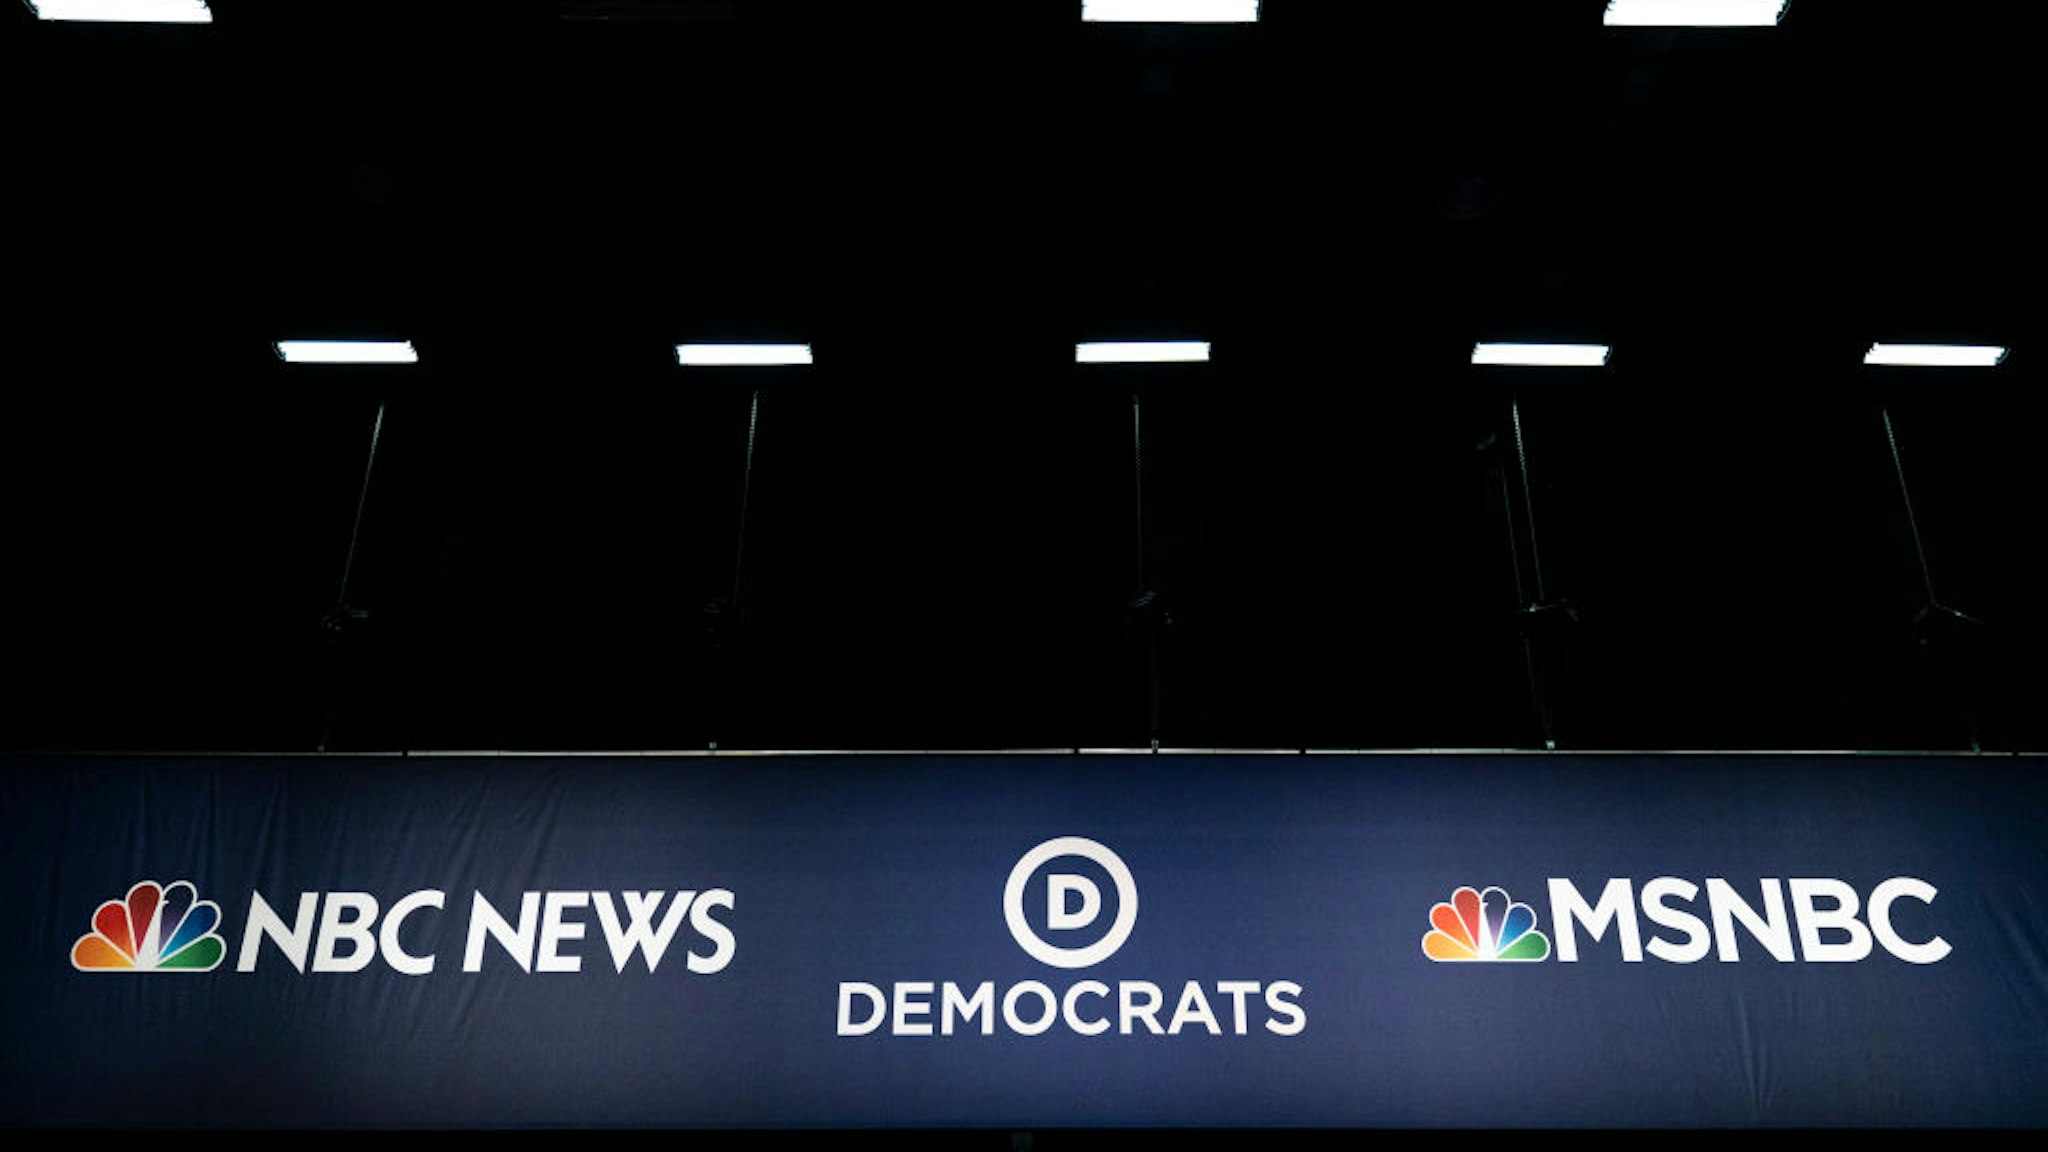 Advertising signage for NBC News and the Democratic Party is seen inside the media filing center at Adrienne Arsht Center for the Performing Arts where the first Democratic presidential primary debates for the 2020 elections will take place, June 25, 2019 in Miami, Florida.